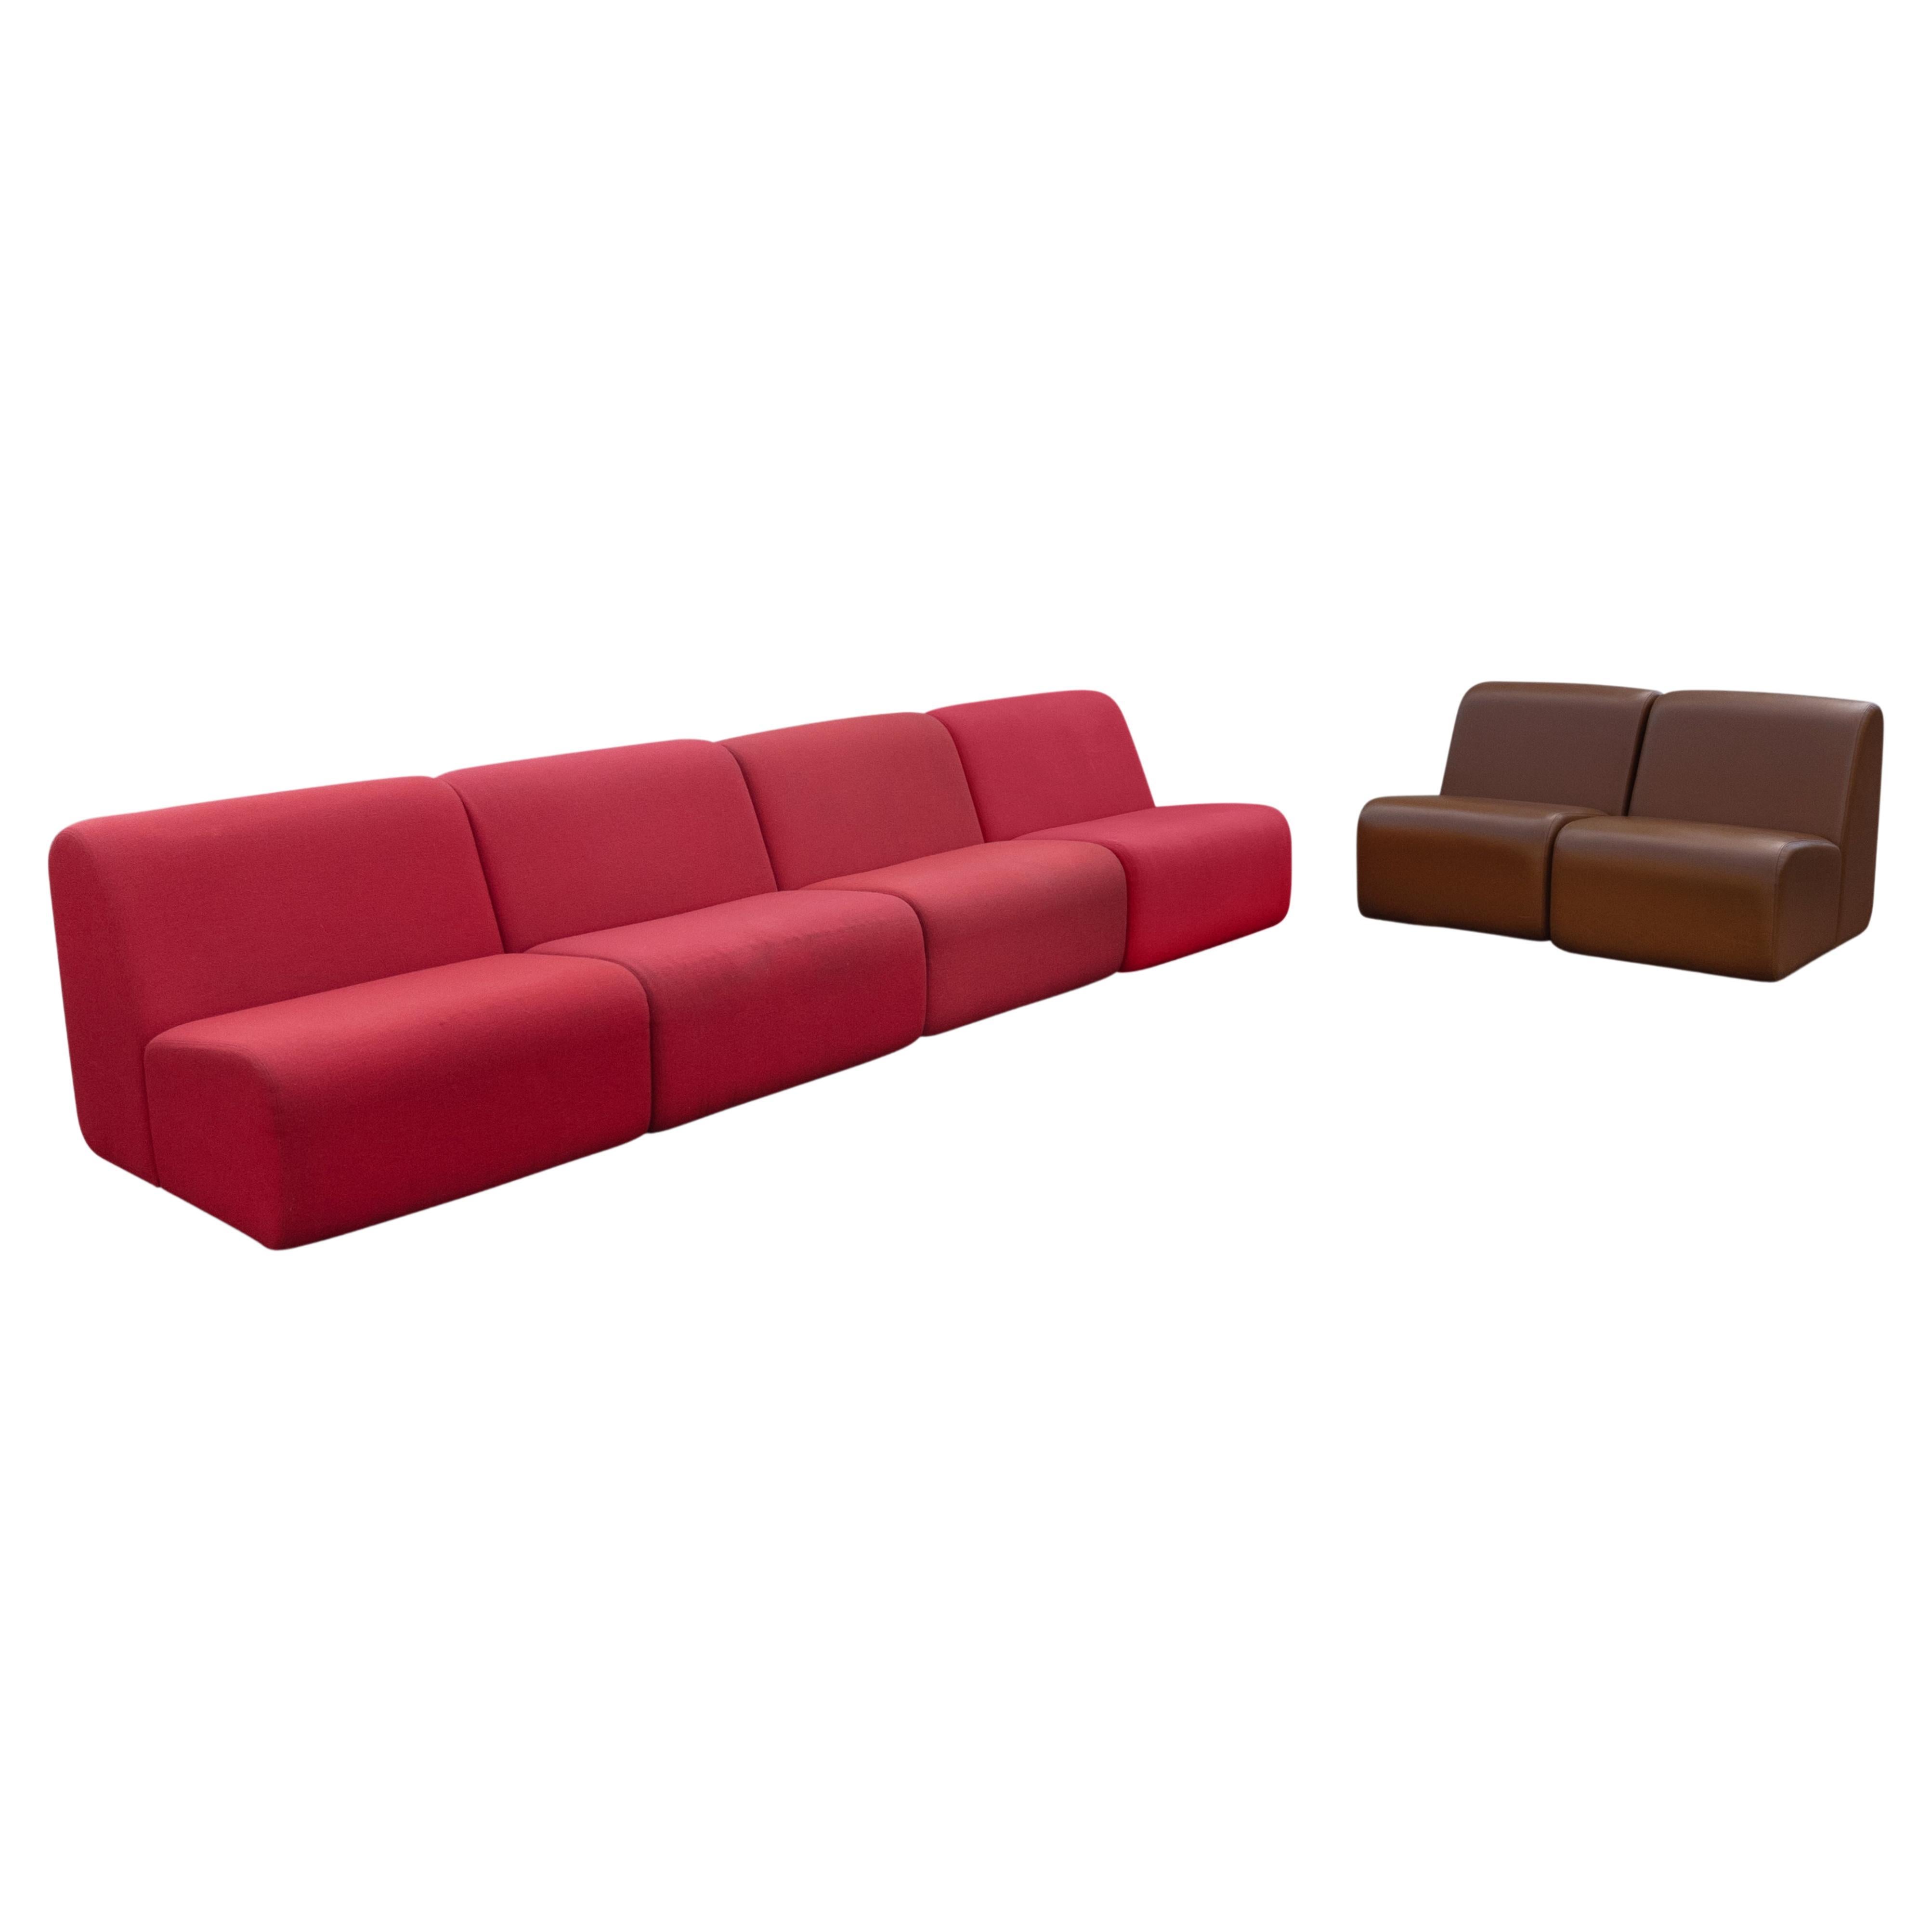 John Mascheroni 6 Piece Sectional Sofa for Vecta Contract Red & Brown Upholstery For Sale